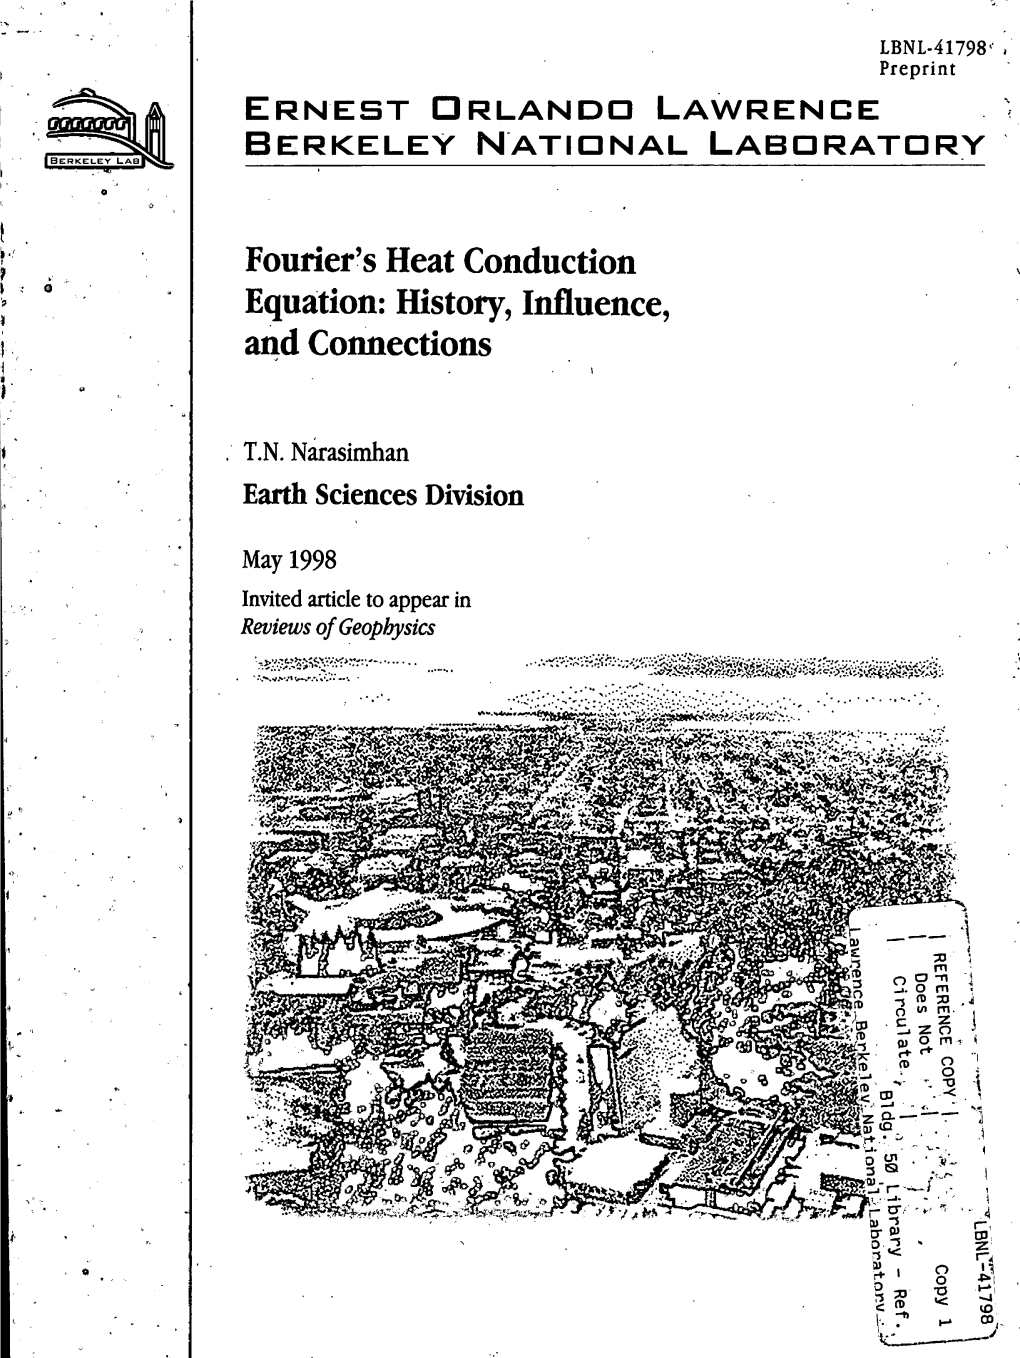 Fourier's Heat Conduction Equation: History, Influence, and Connections